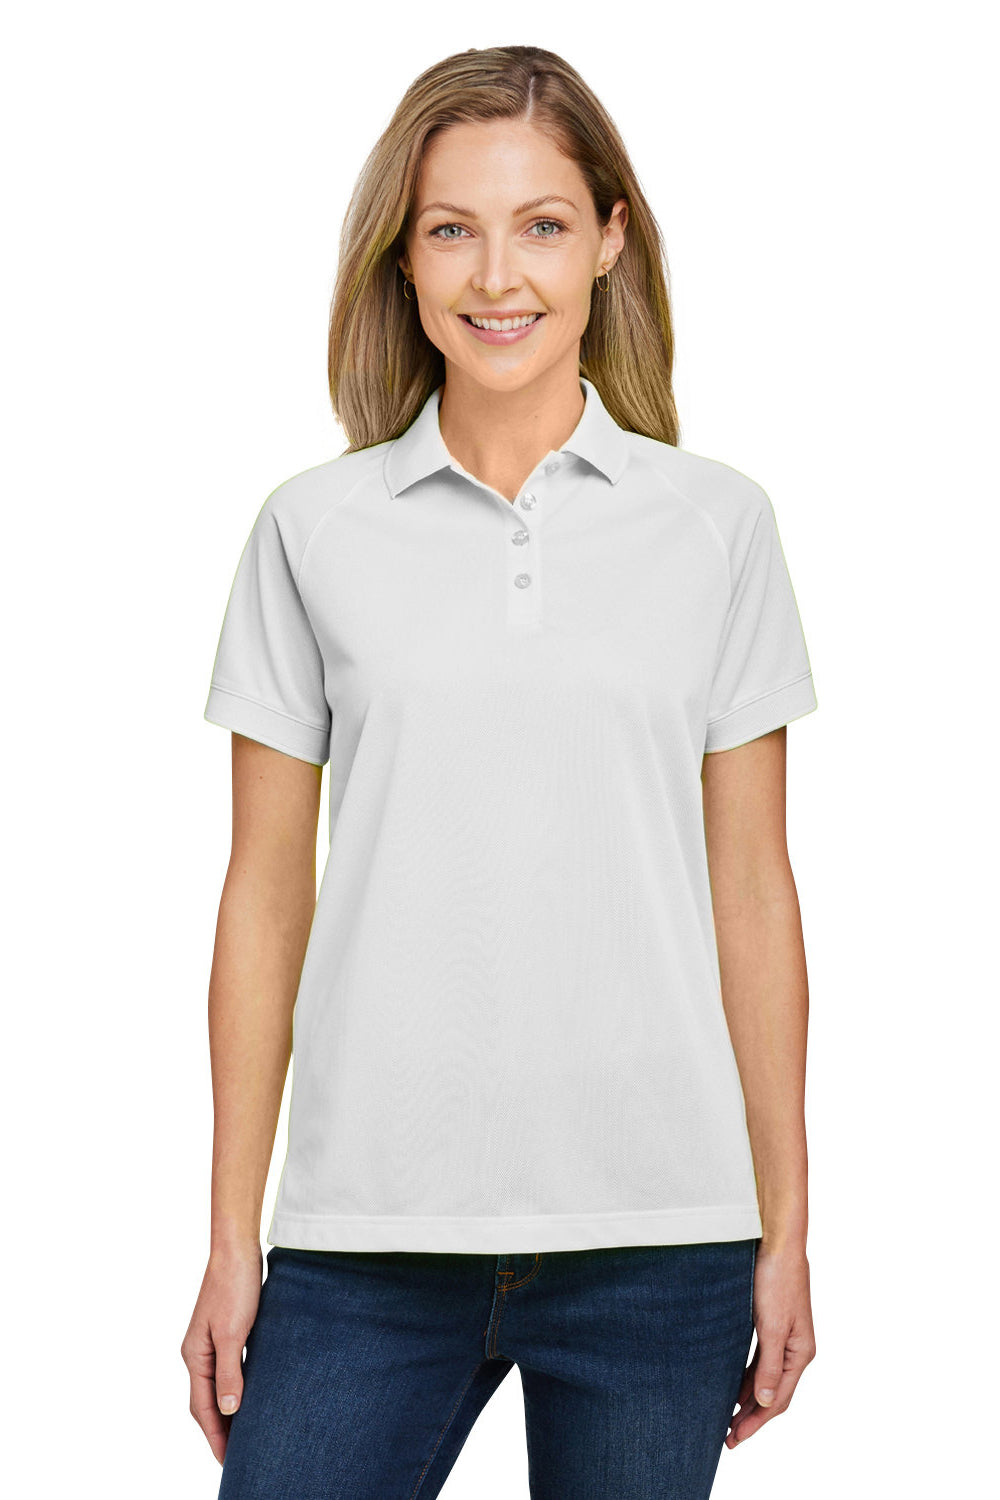 Harriton M208W Womens Charge Moisture Wicking Short Sleeve Polo Shirt White Front